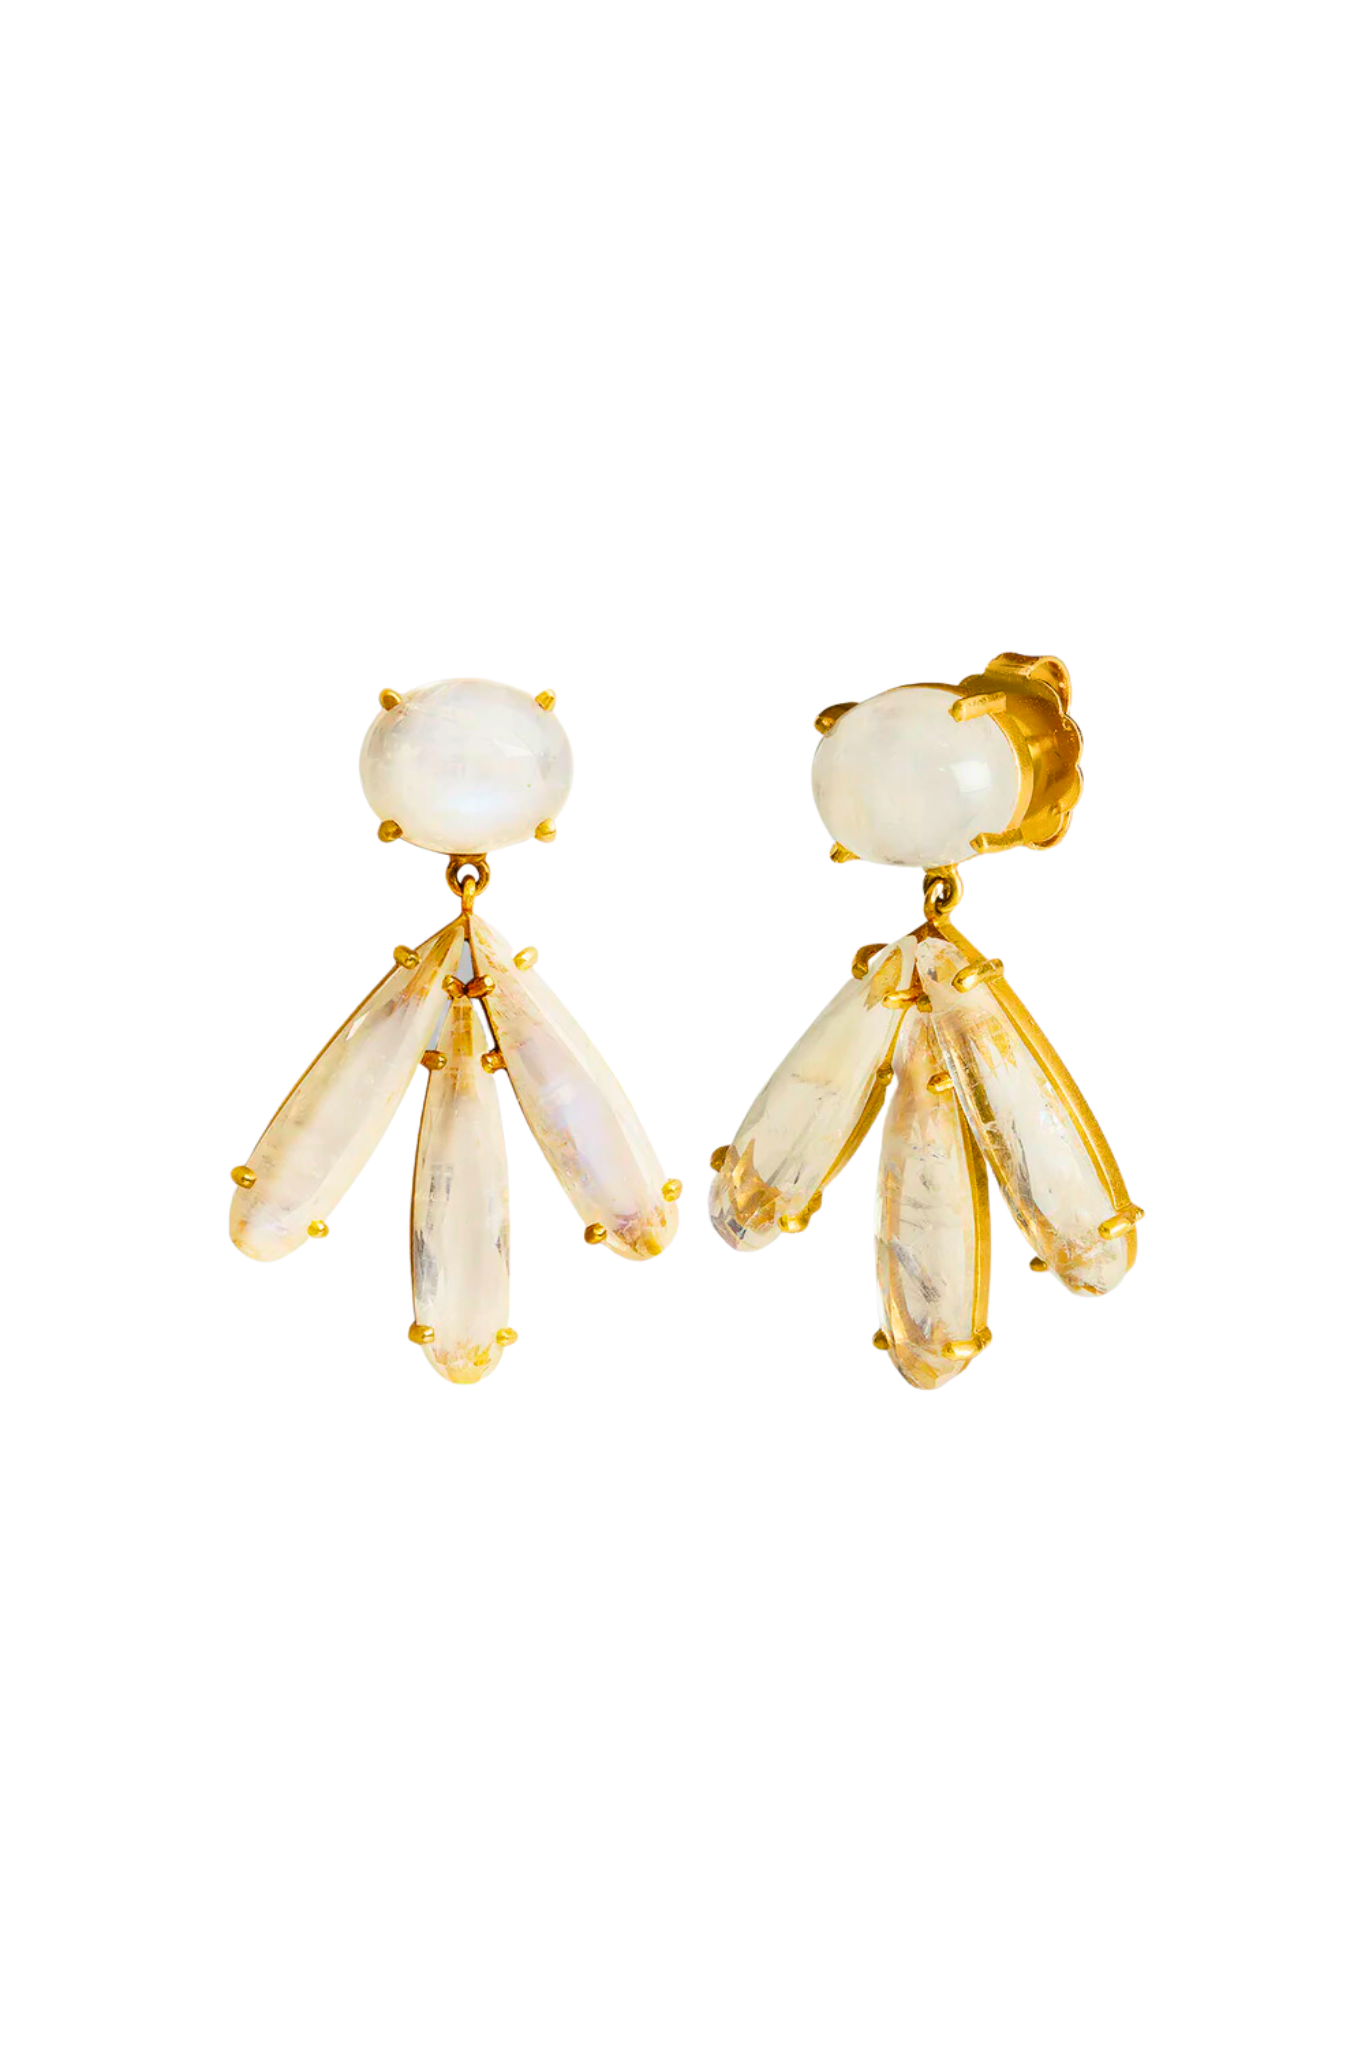 Irene Neuwirth Classic 18K Yellow Gold Post Earrings set with 11x9 Ovals and 20x5 Rose Cut Pear Shape Rainbow Moonstone